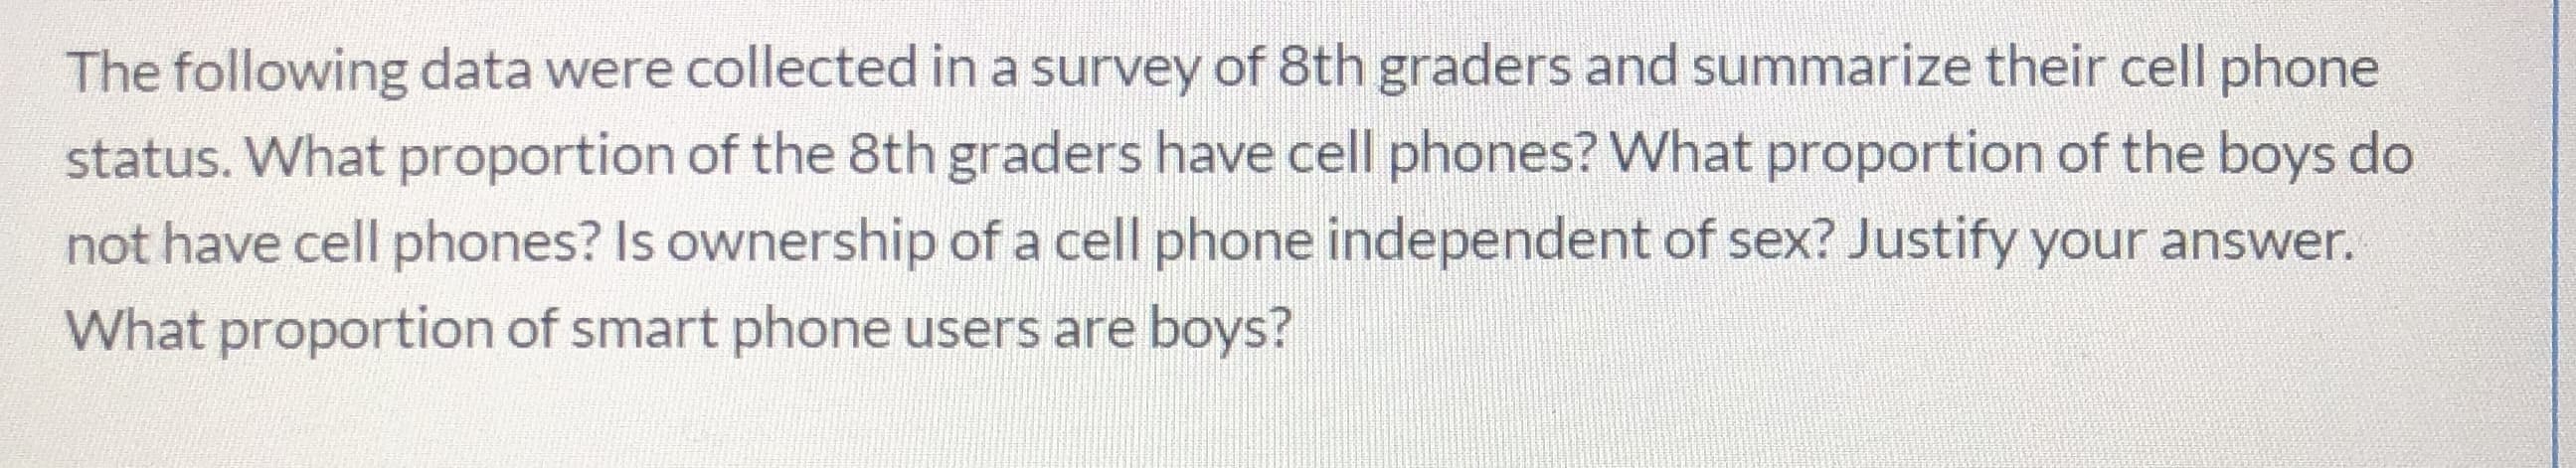 The following data were collected in a survey of 8th graders and summarize their cell phone
status. What proportion of the 8th graders have cell phones? What proportion of the boys do
not have cell phones? Is ownership of a cell phone independent of sex? Justify your answer.
What proportion of smart phone users are boys?
